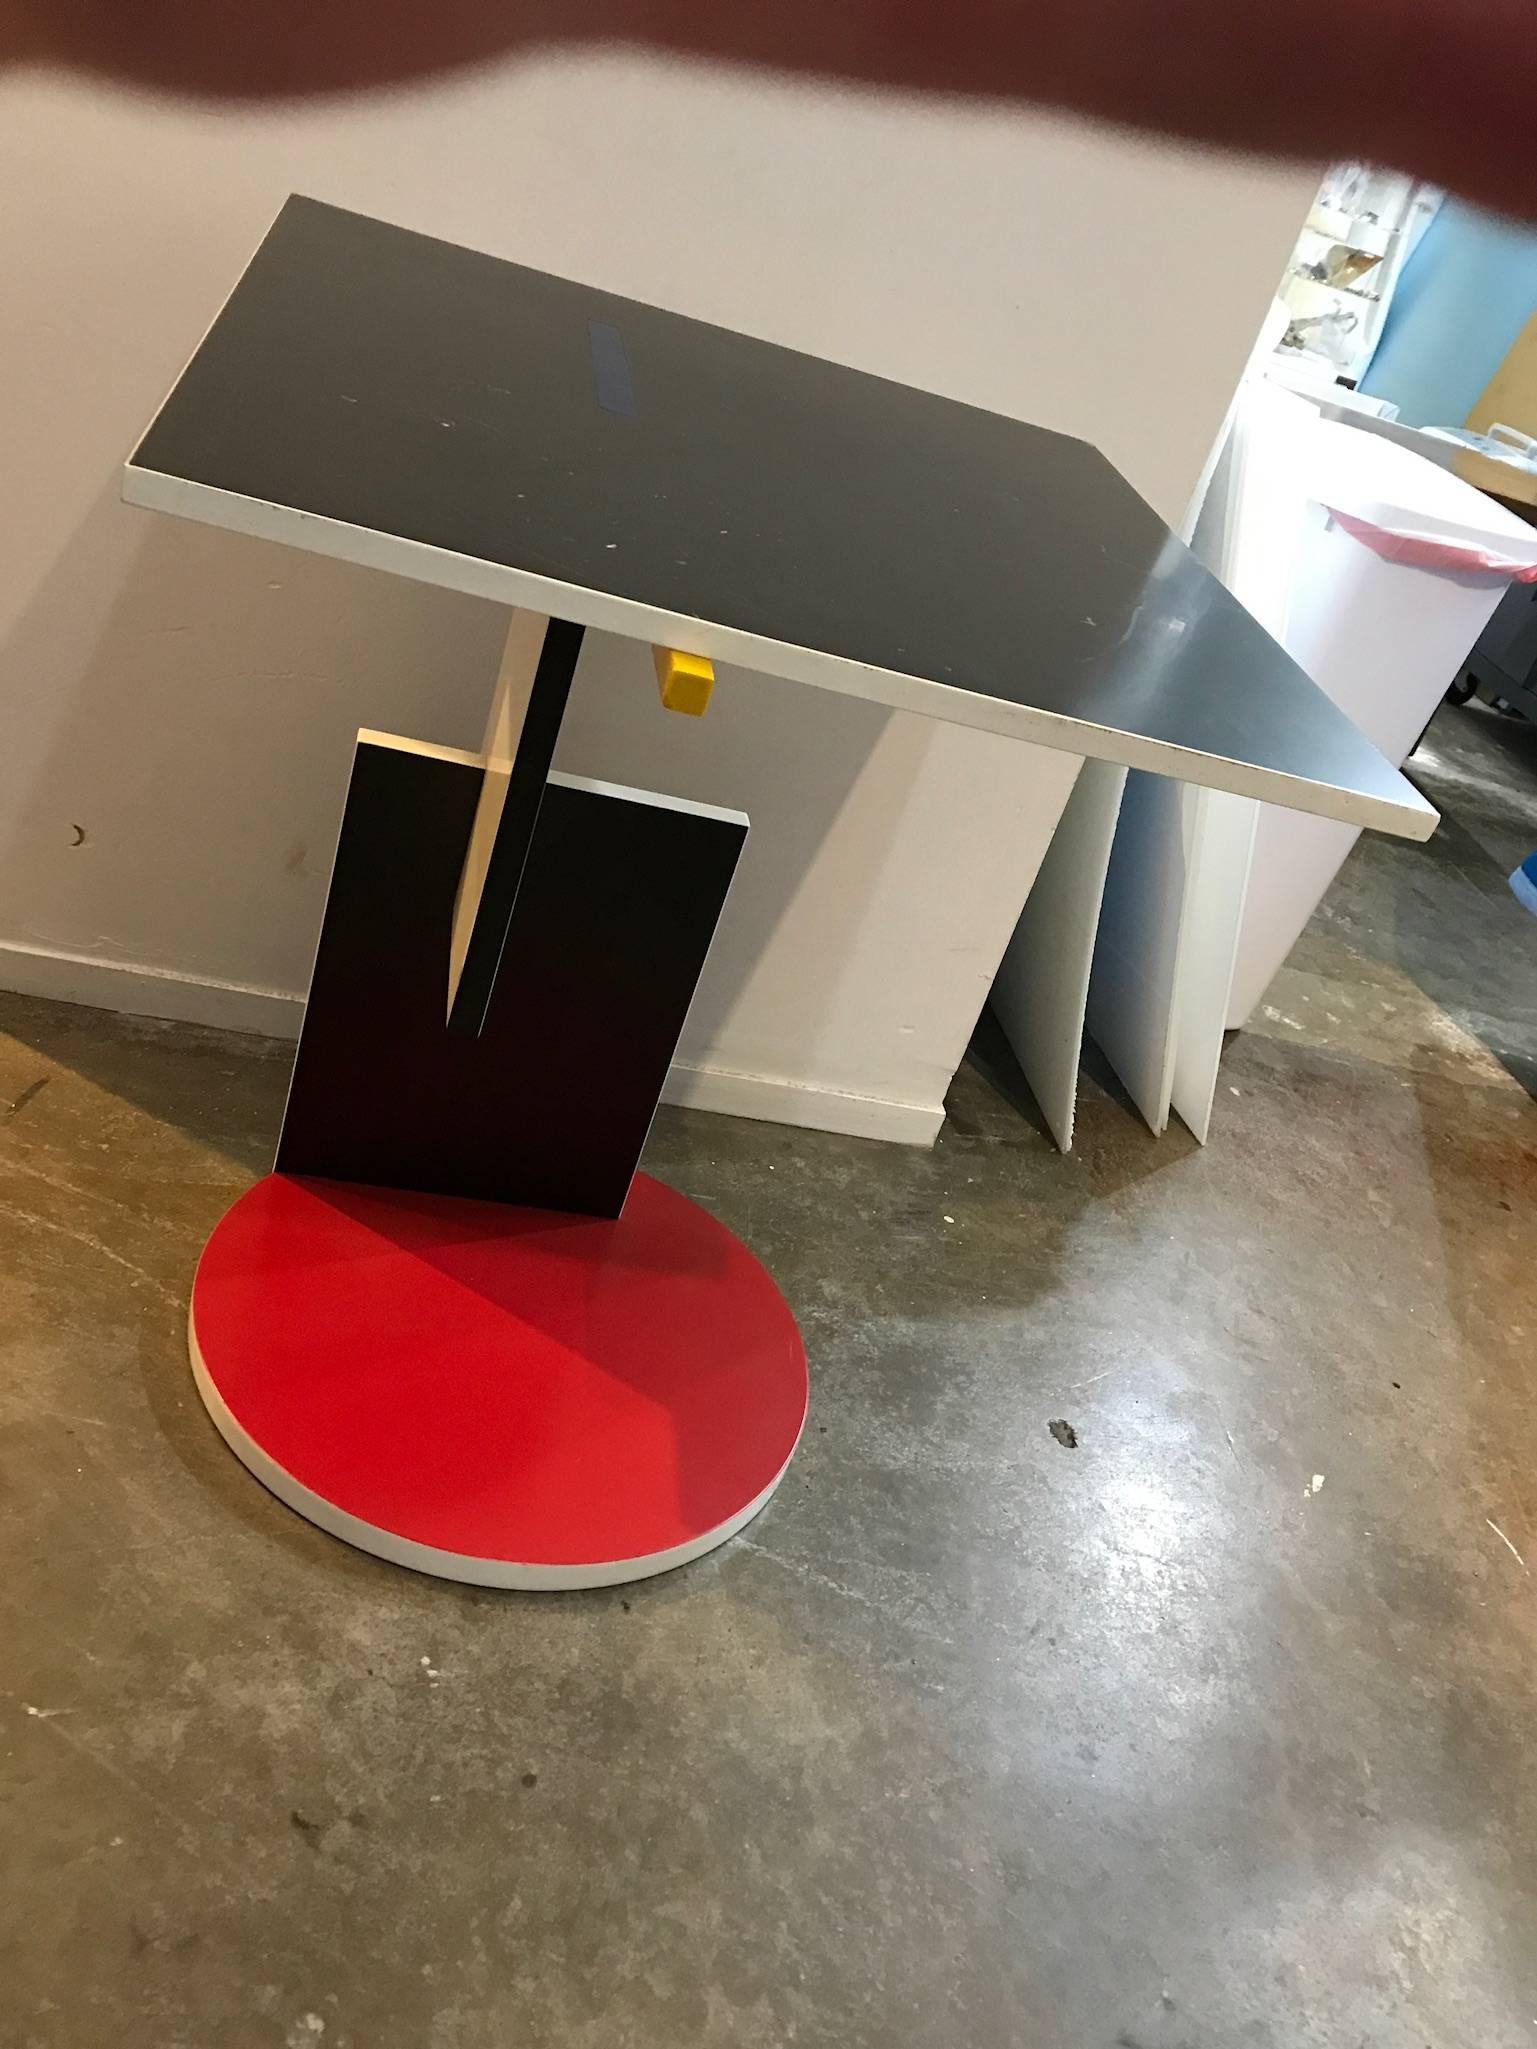 The offered is a side or occasional table by Dutch designer and architect Gerrit Rietveld. Rietveld created this piece for his 1924 Schroeder House. This side table follows the primary color palate and geometric cubist form of De Stijl design. This